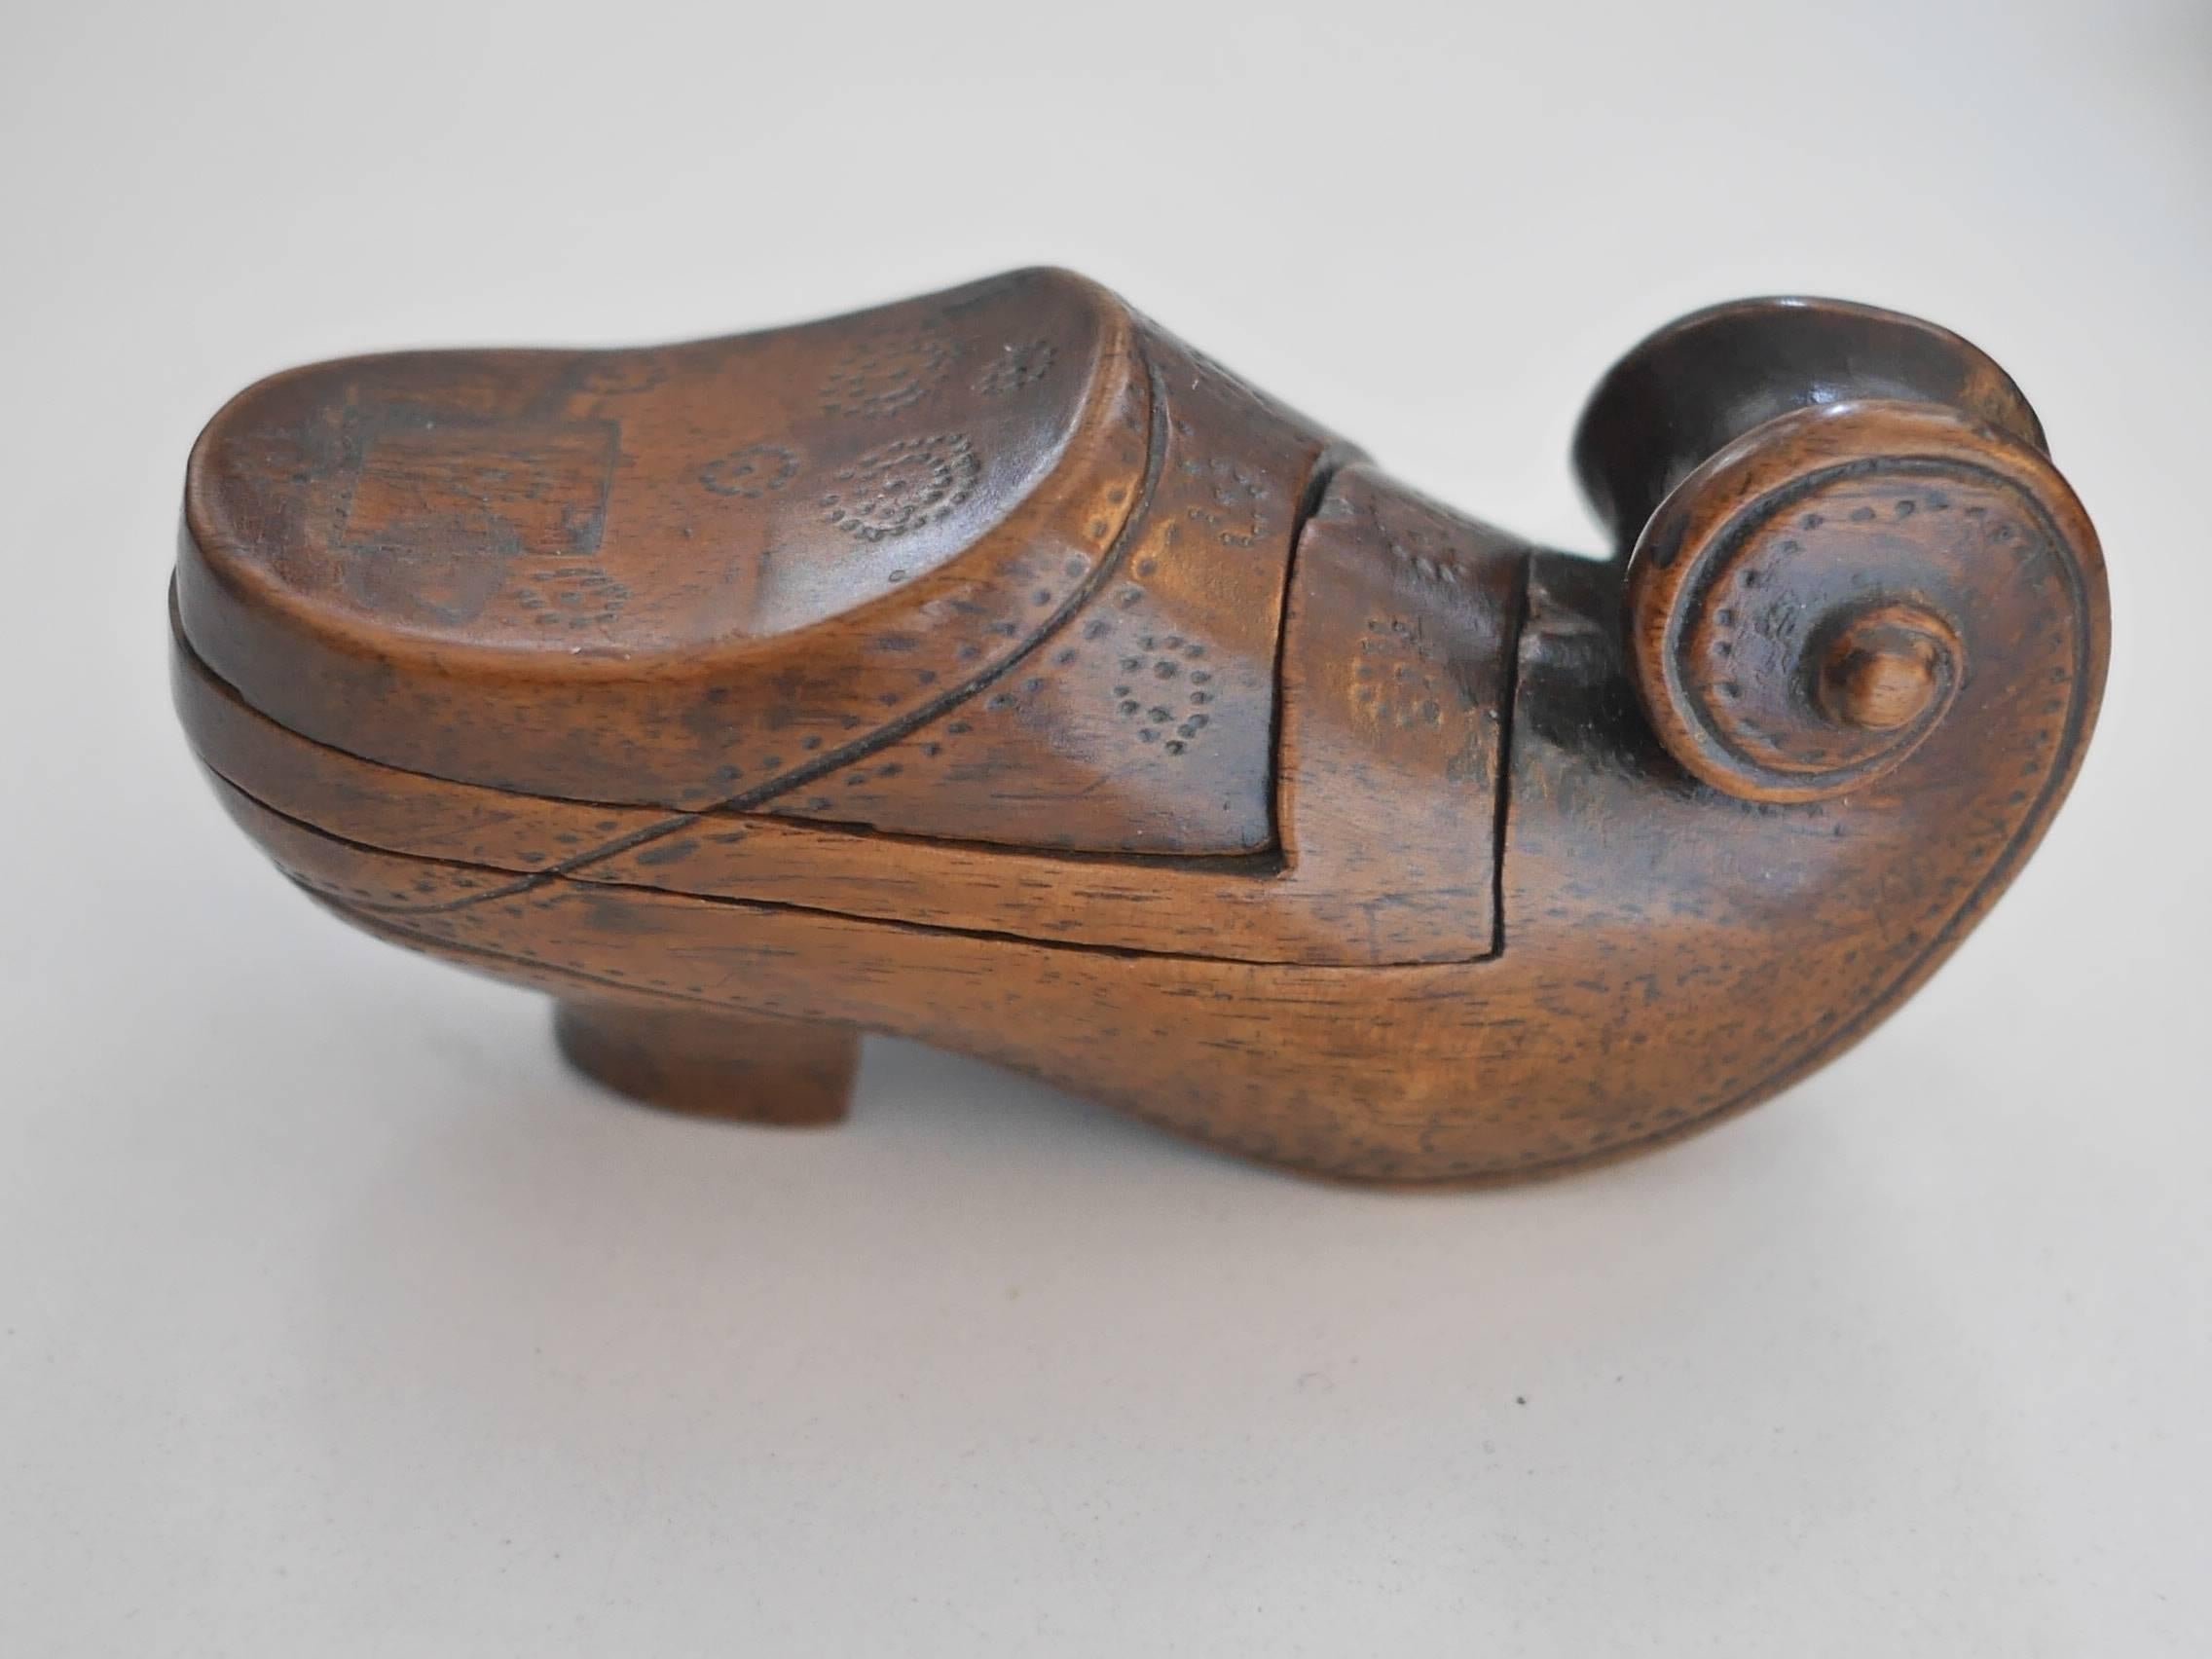 Wooden carved shoe snuffbox, from Jura, France, with a two steps mechanism for a secure lid. This is a typical Folk Art piece of work. Inhaling snuff, or snuffing, as it is also called, was first witnessed by a European missionary in 1493, in the